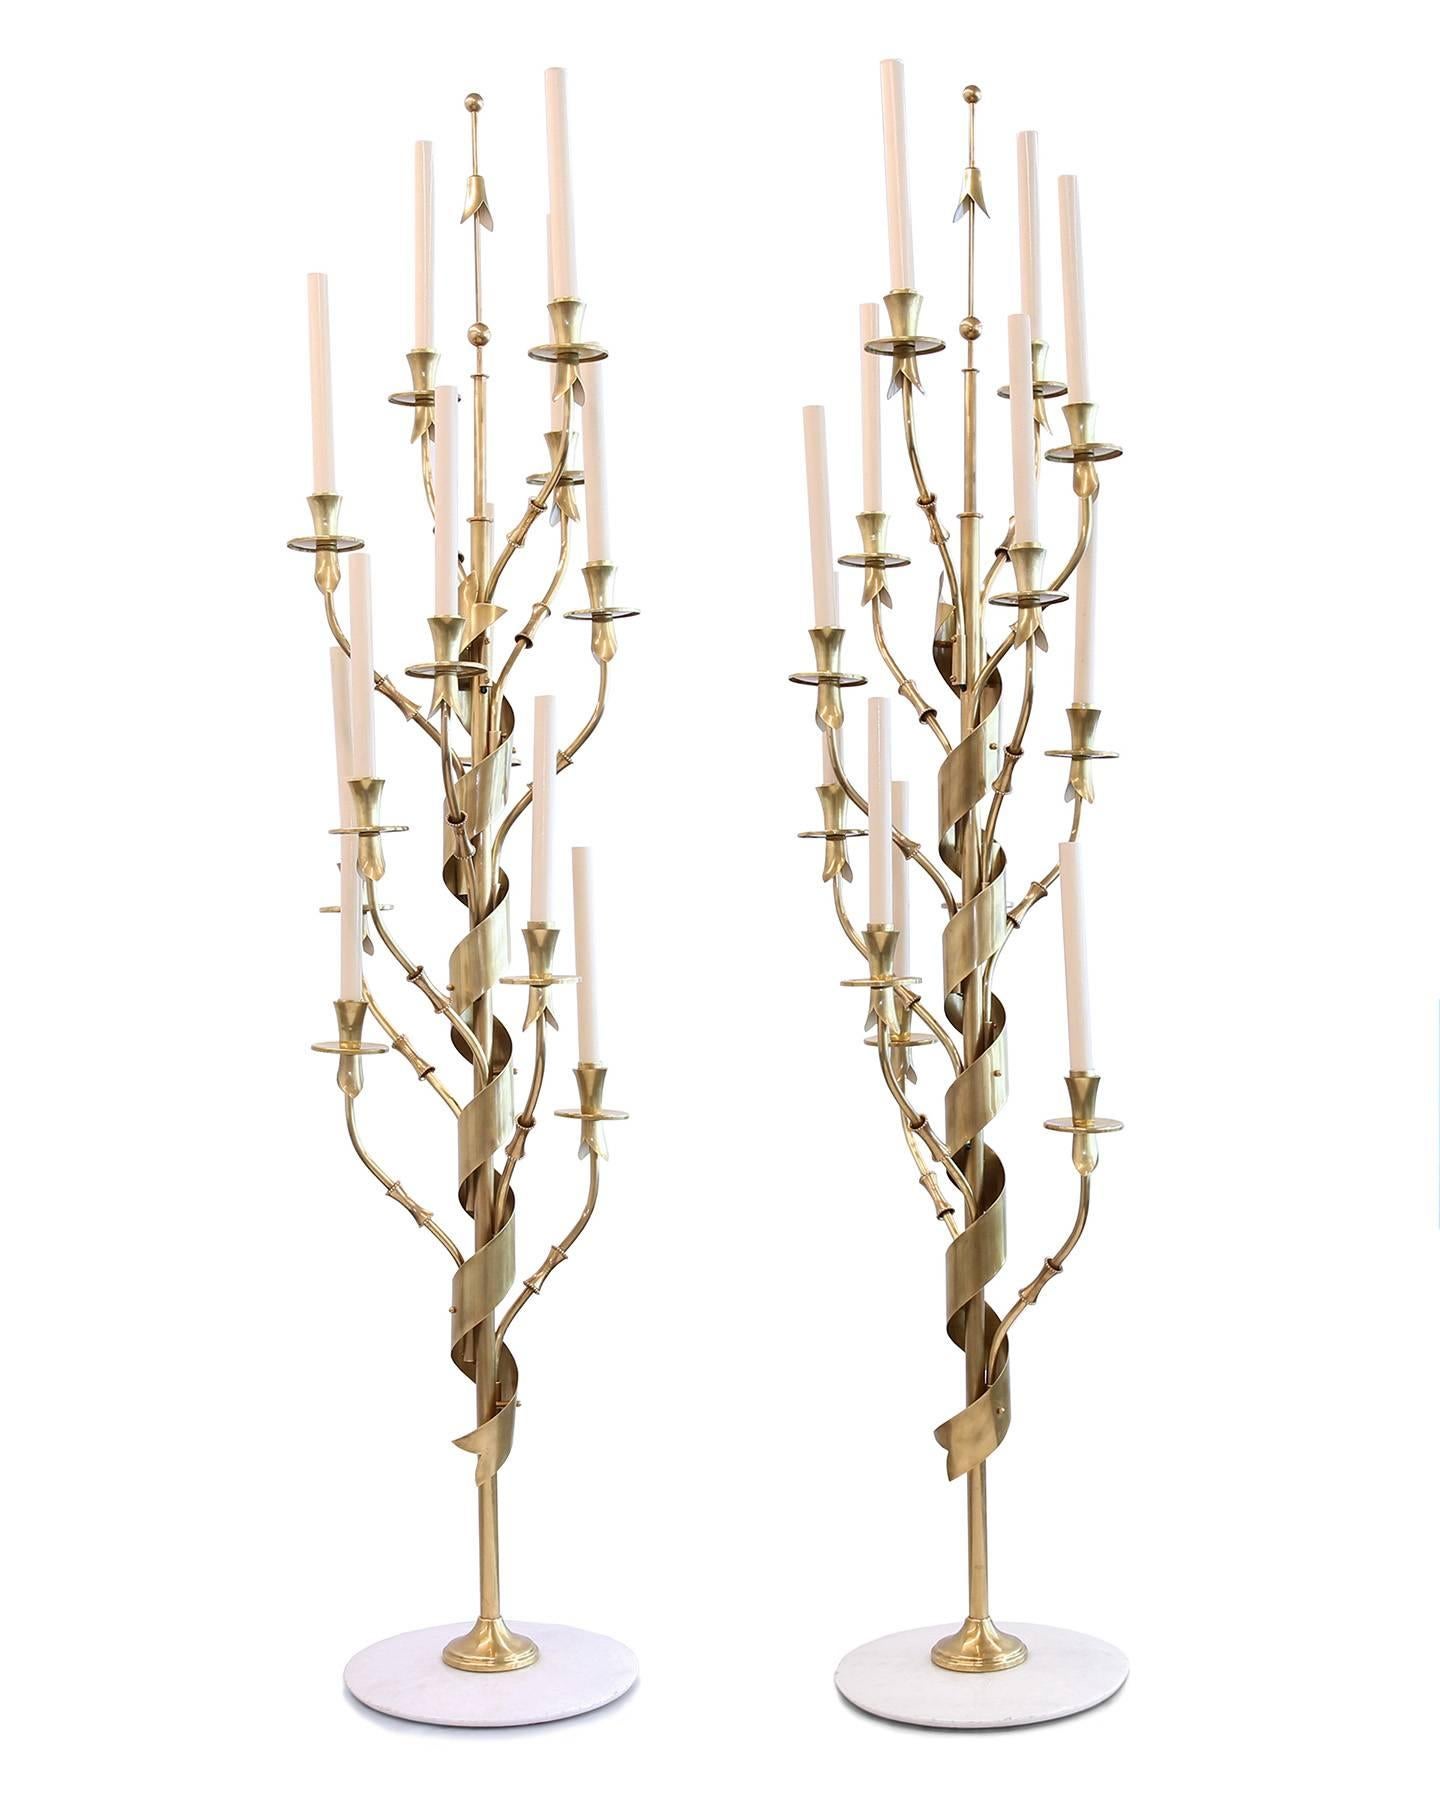 Candelabra-style brass and marble floor lamp by Stilnovo Italy, 1960s. Measures: 65'' H x 14'' D. 

These lamps have recently undergone complete restoration - including full disassembly and polishing of all brass pieces. These are show stoppers!